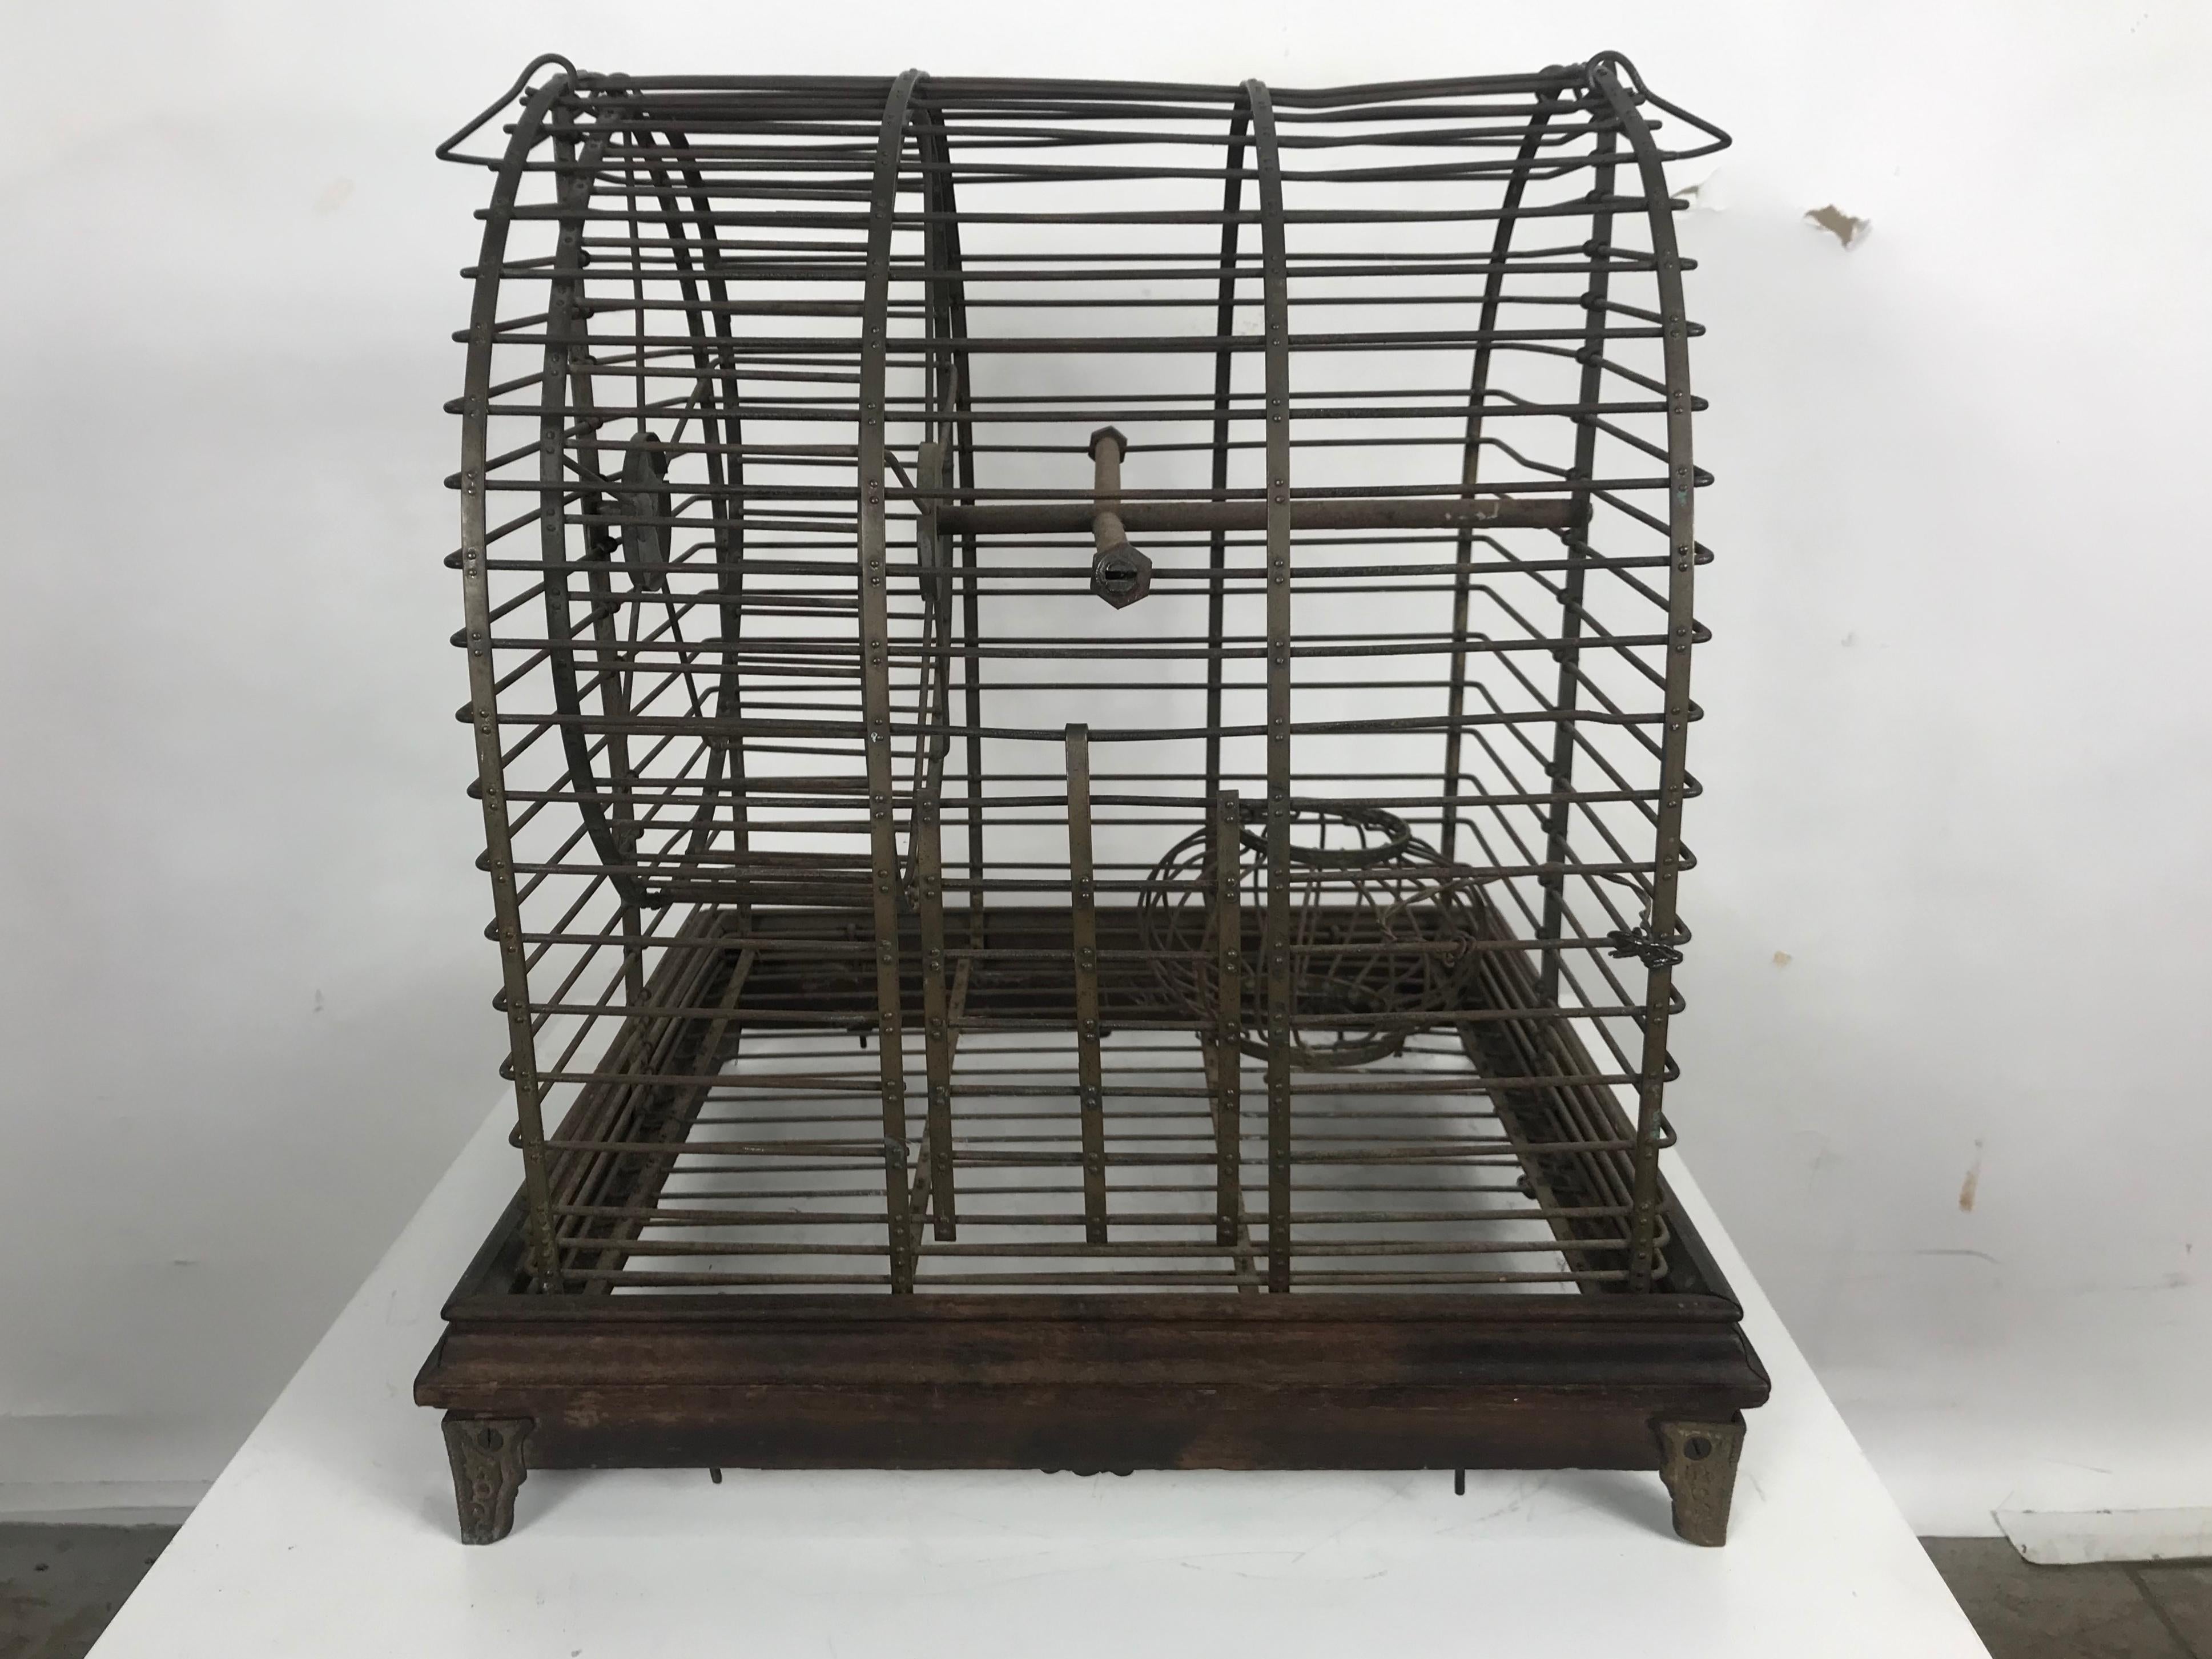 Unusual turn of the century industrial brass small animal cage with wheel. Possibly made by Pierce Arrow. Buffalo NY. Superior quality and construction. Smooth spinning hamster wheel, charming little decorative item.